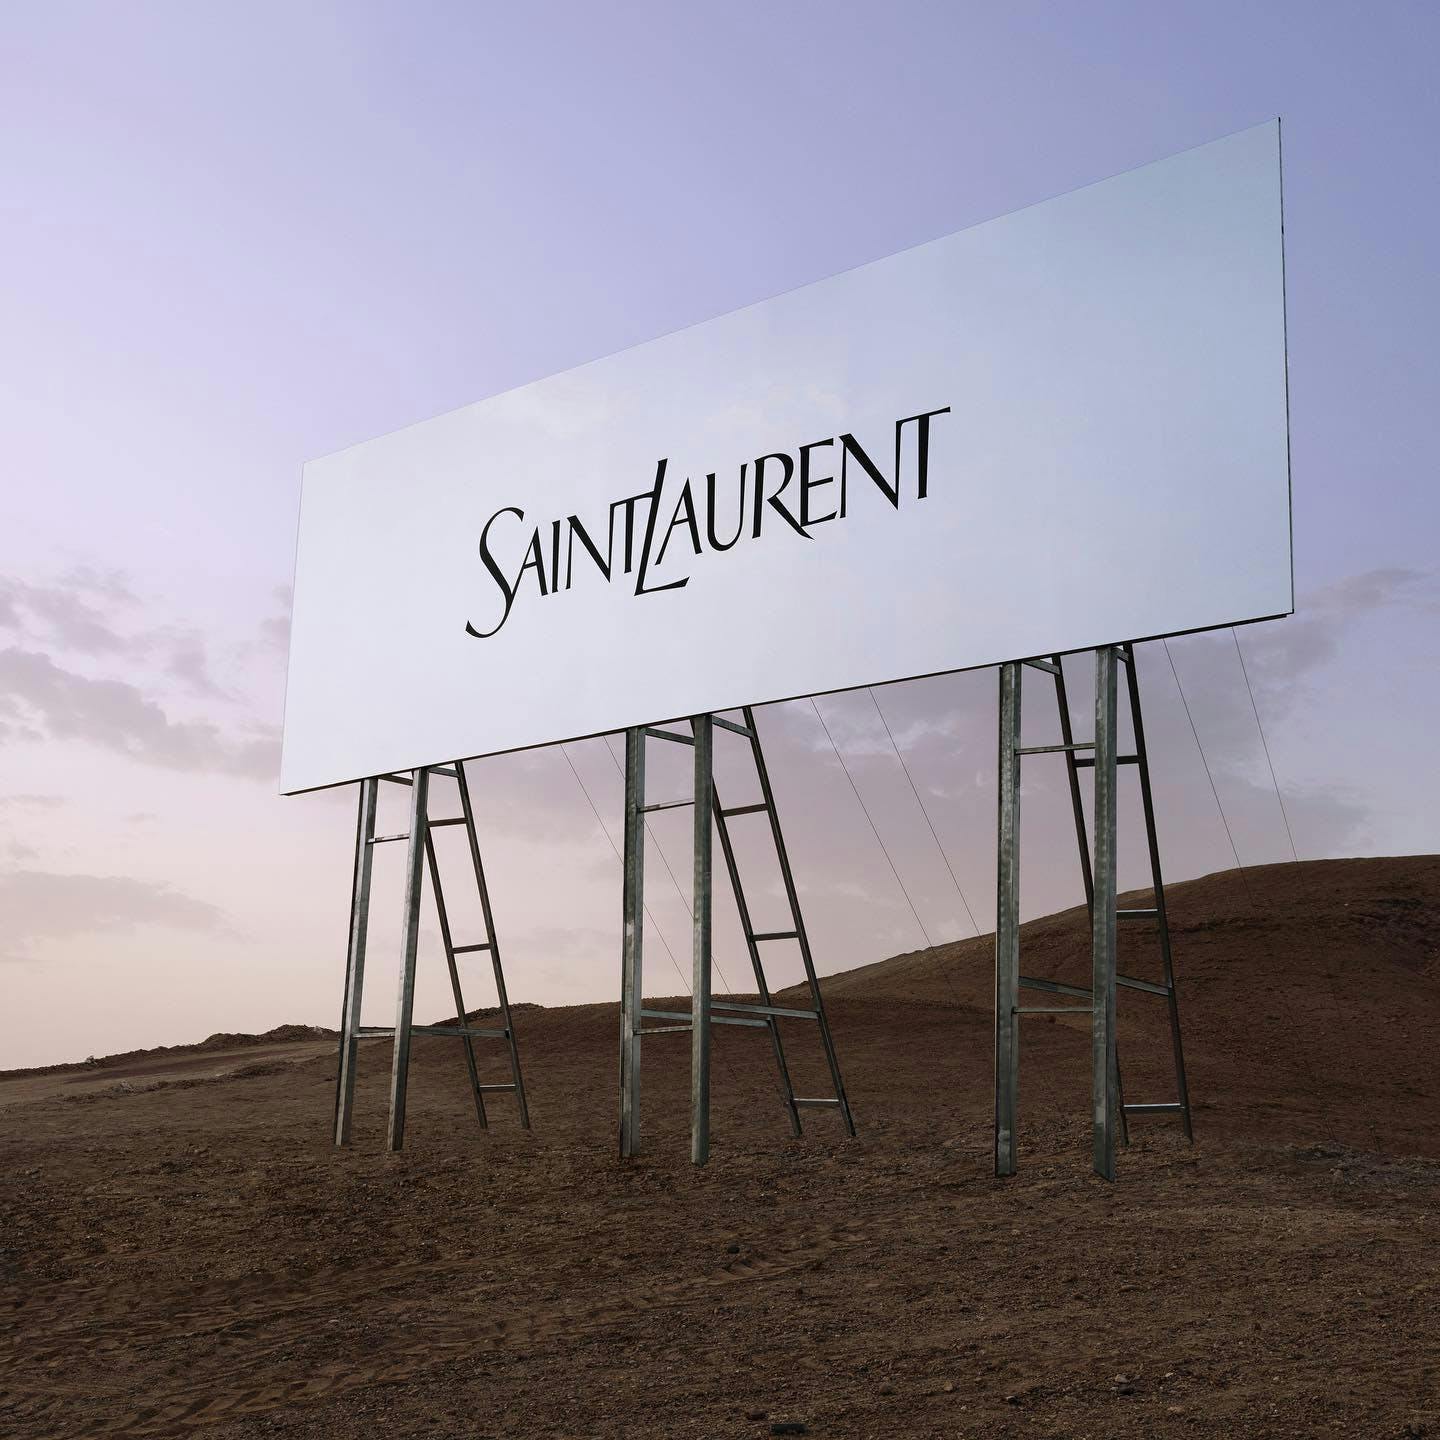 Billboard with the Saint Laurent logo on it in the middle of a desert.